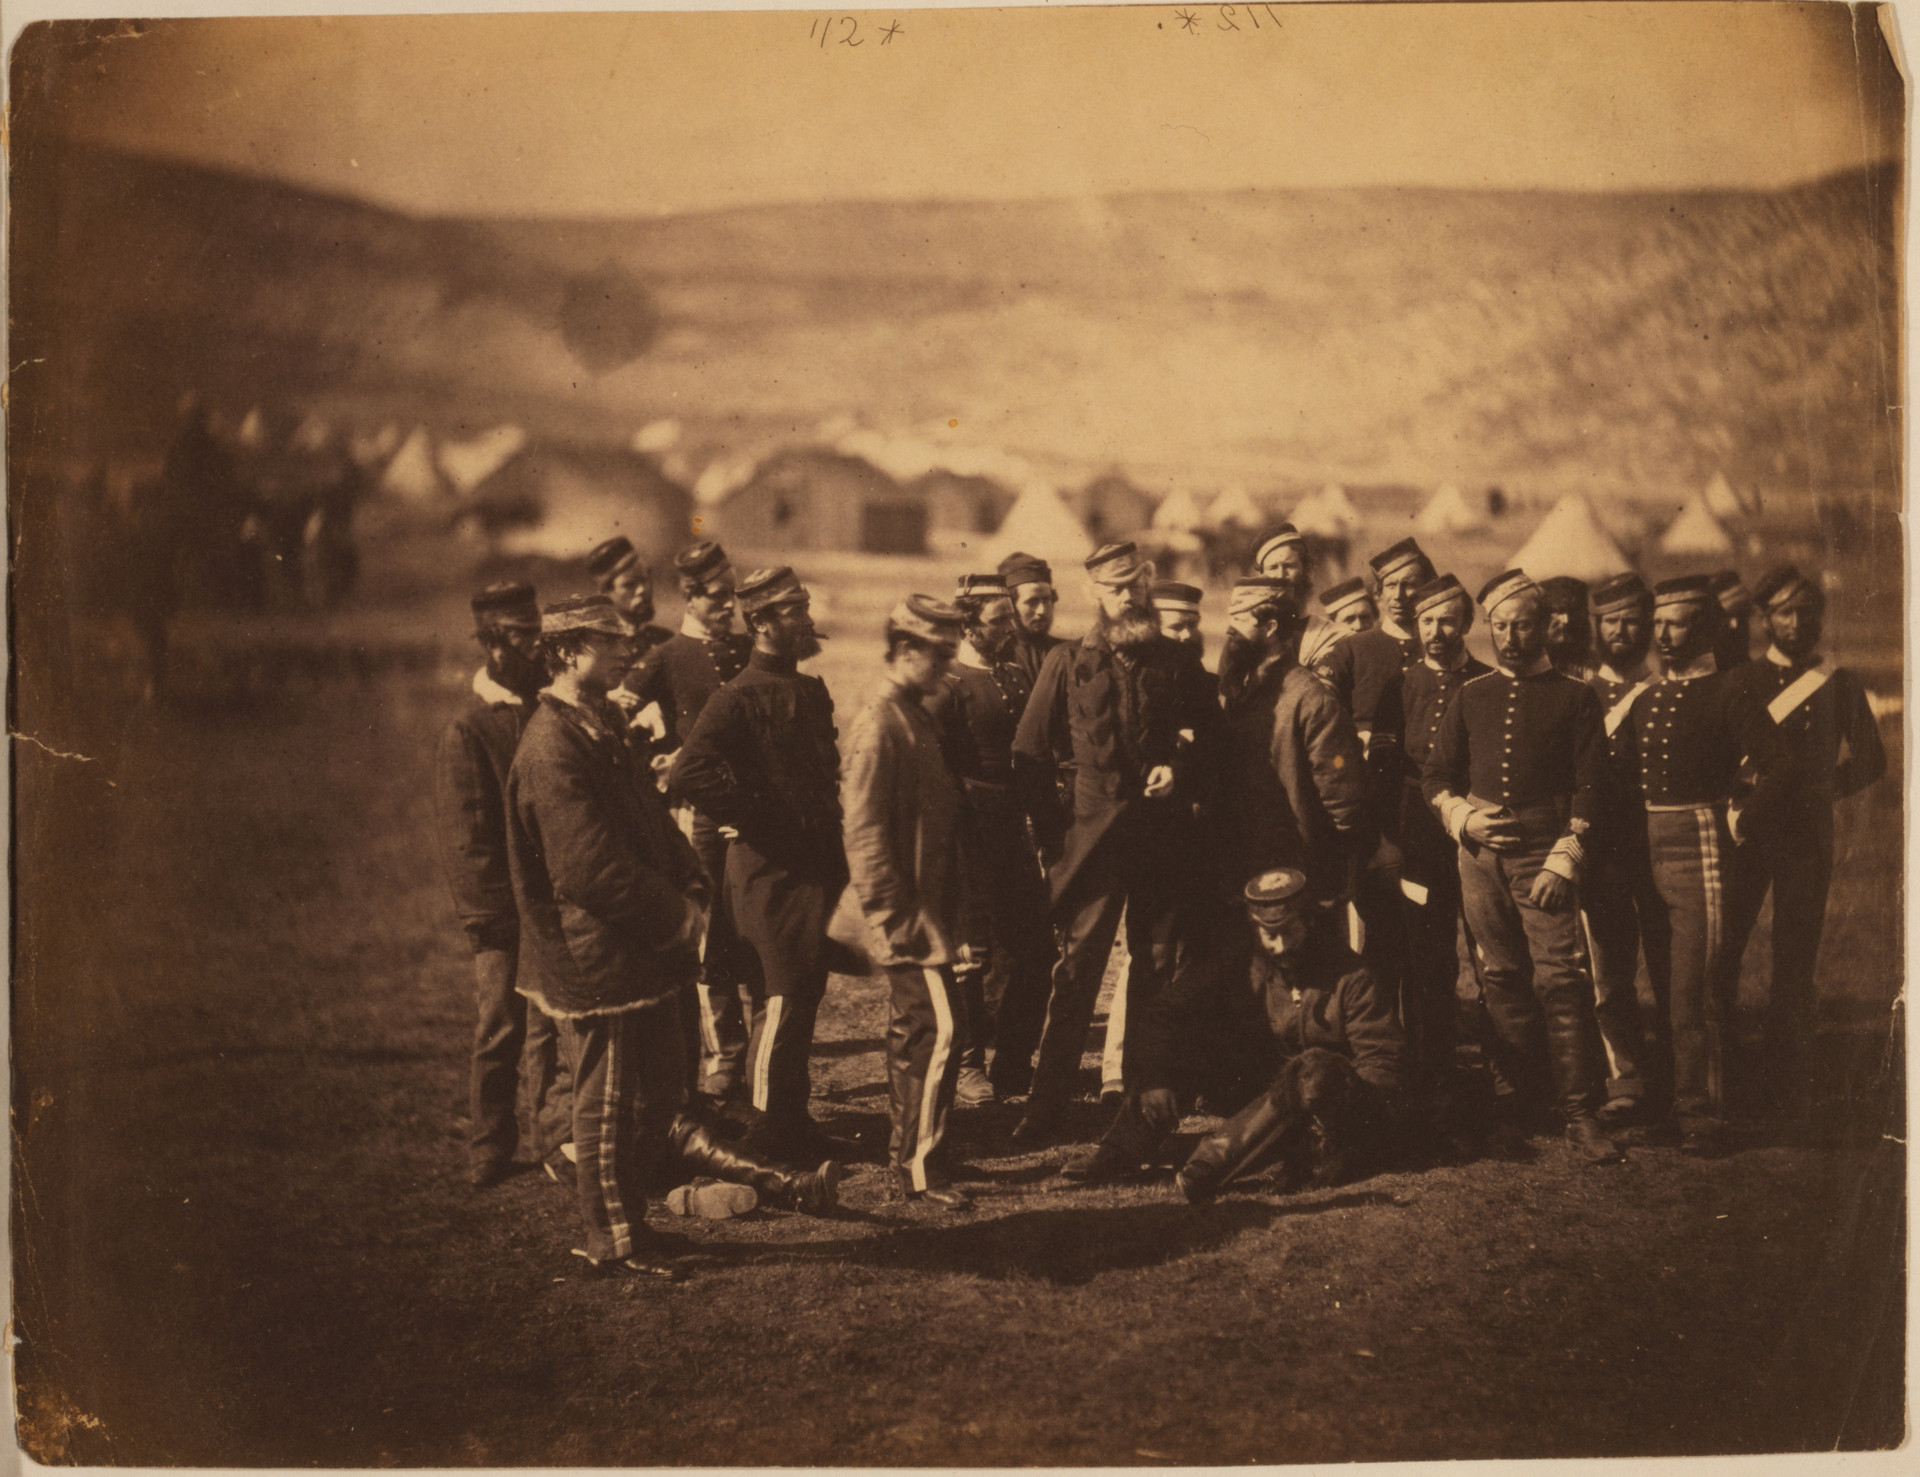 Roger Fenton. Colonel Doherty, officers & men of the 13th Light Dragoons. Library of Congress.